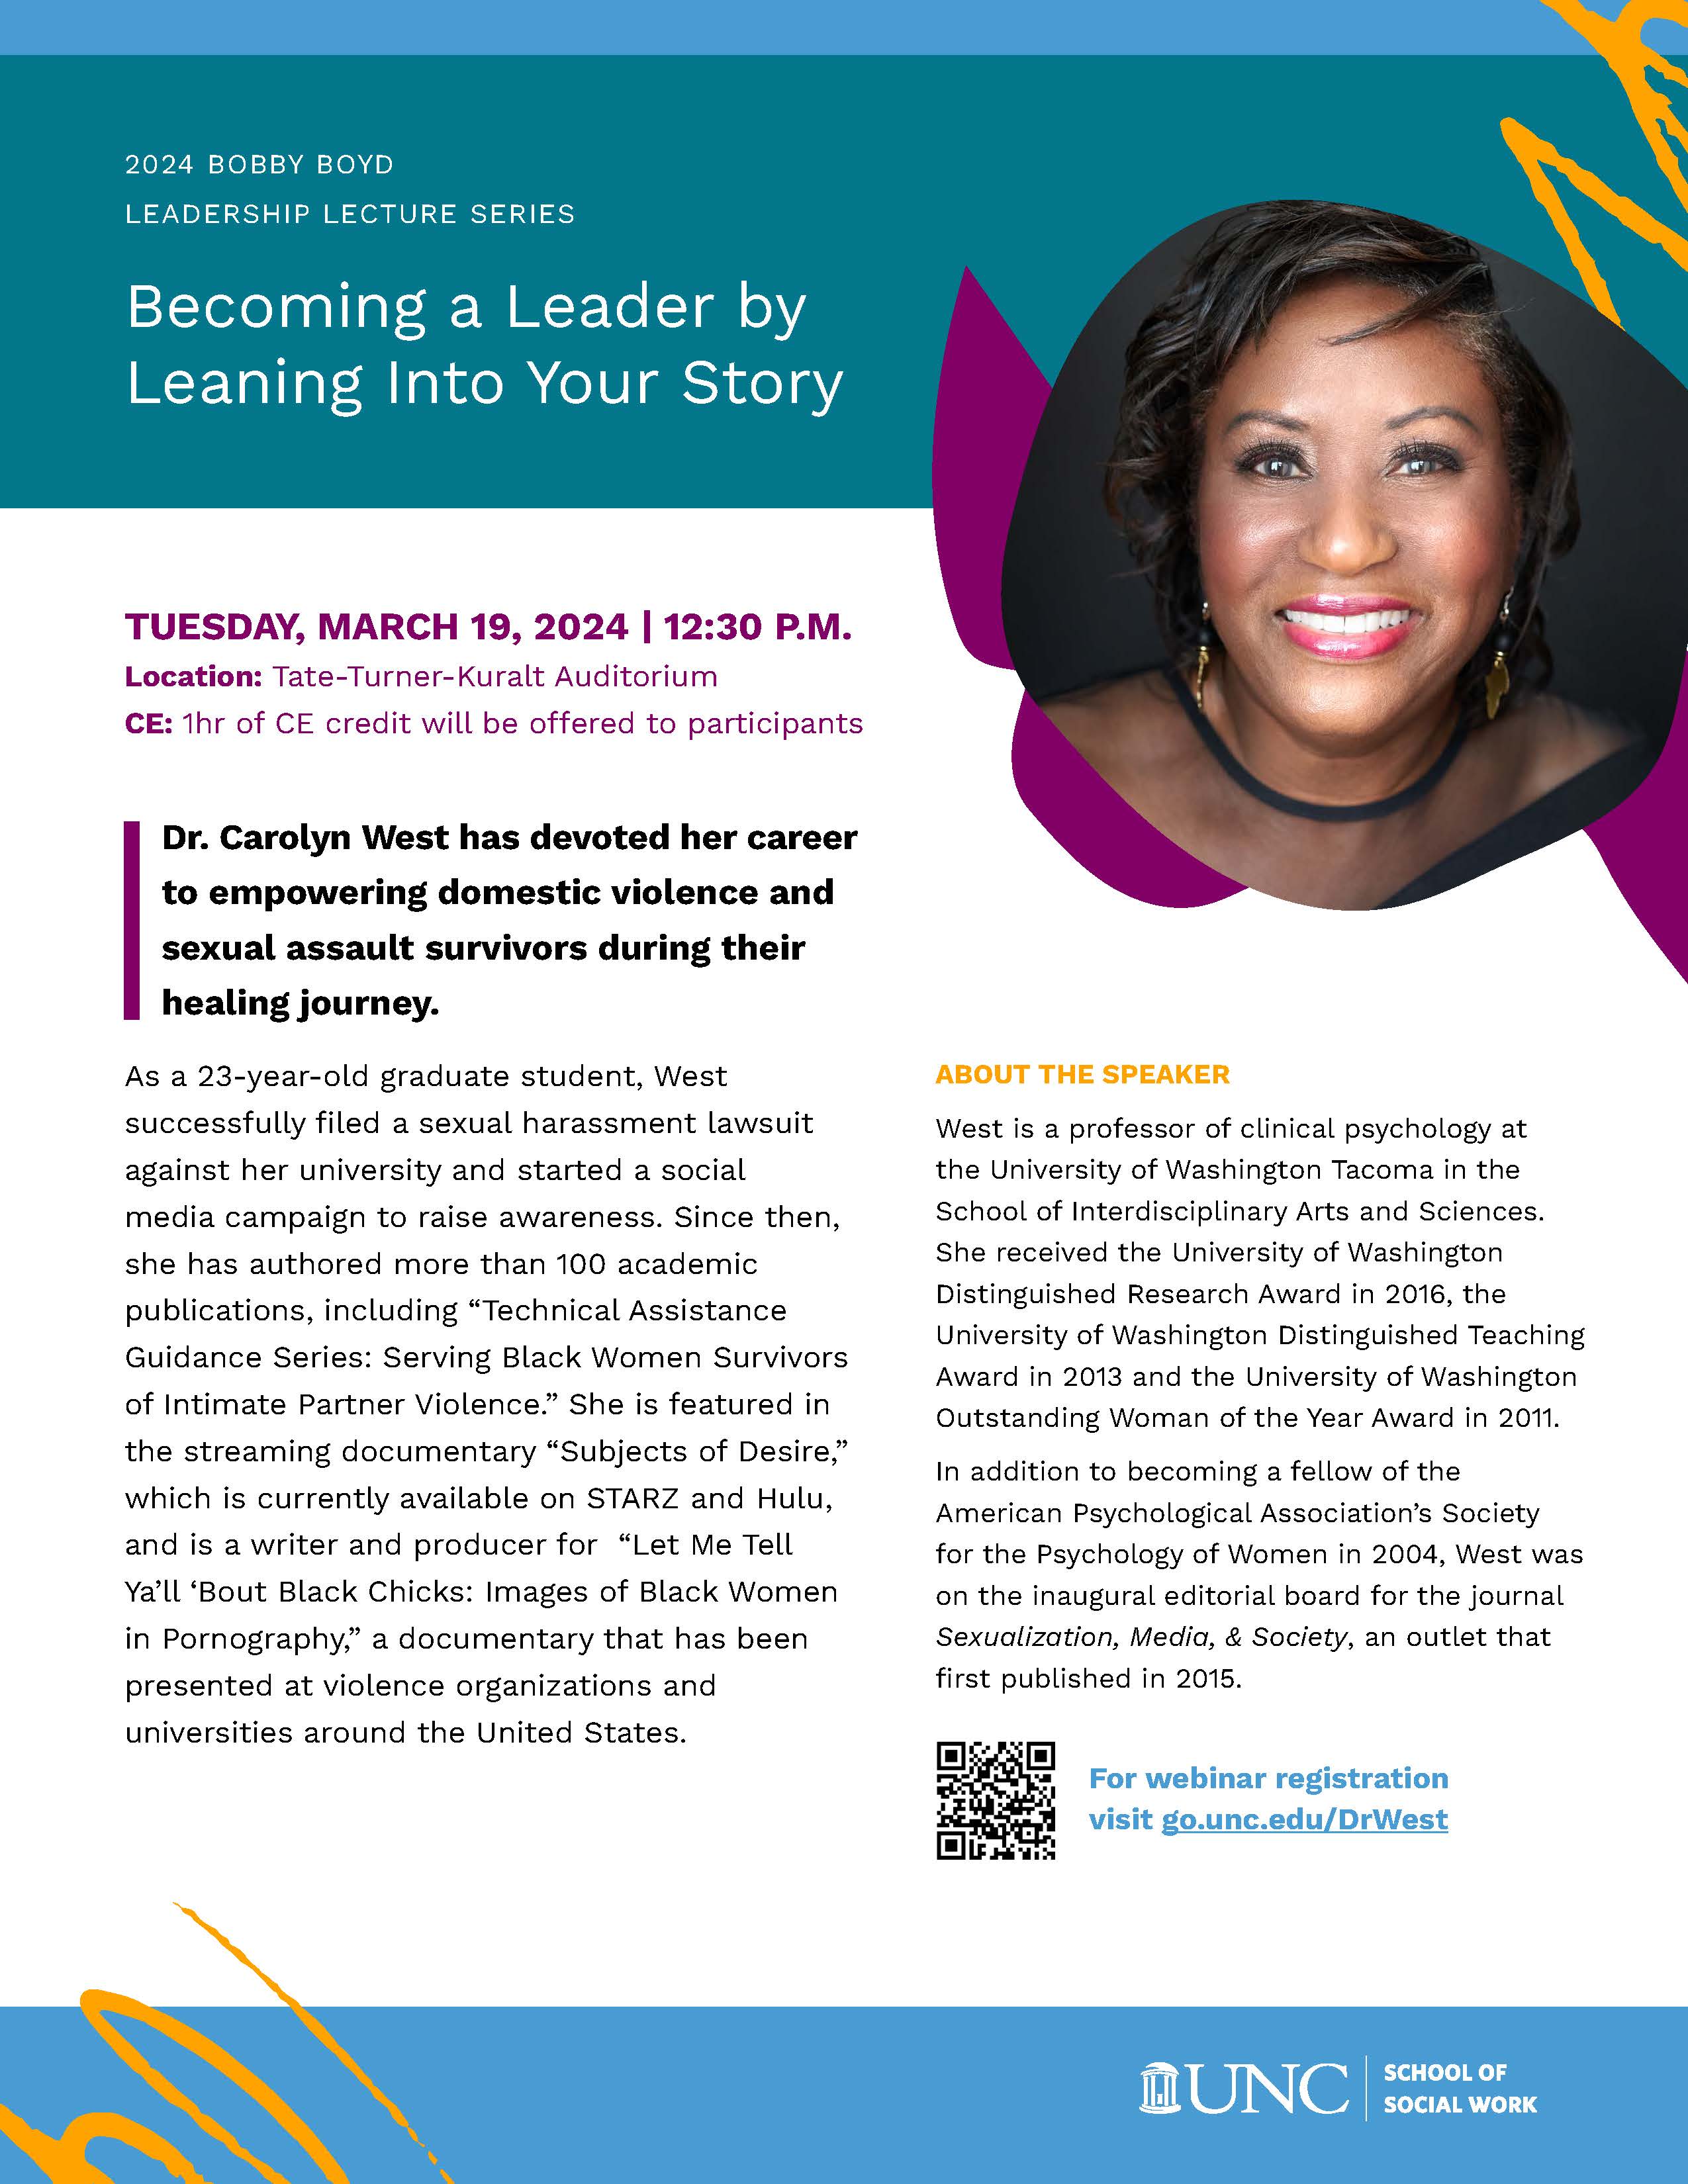 Becoming a Leader By Leaning into your Story. Tuesday, March 19,2024 at 12:30 PM